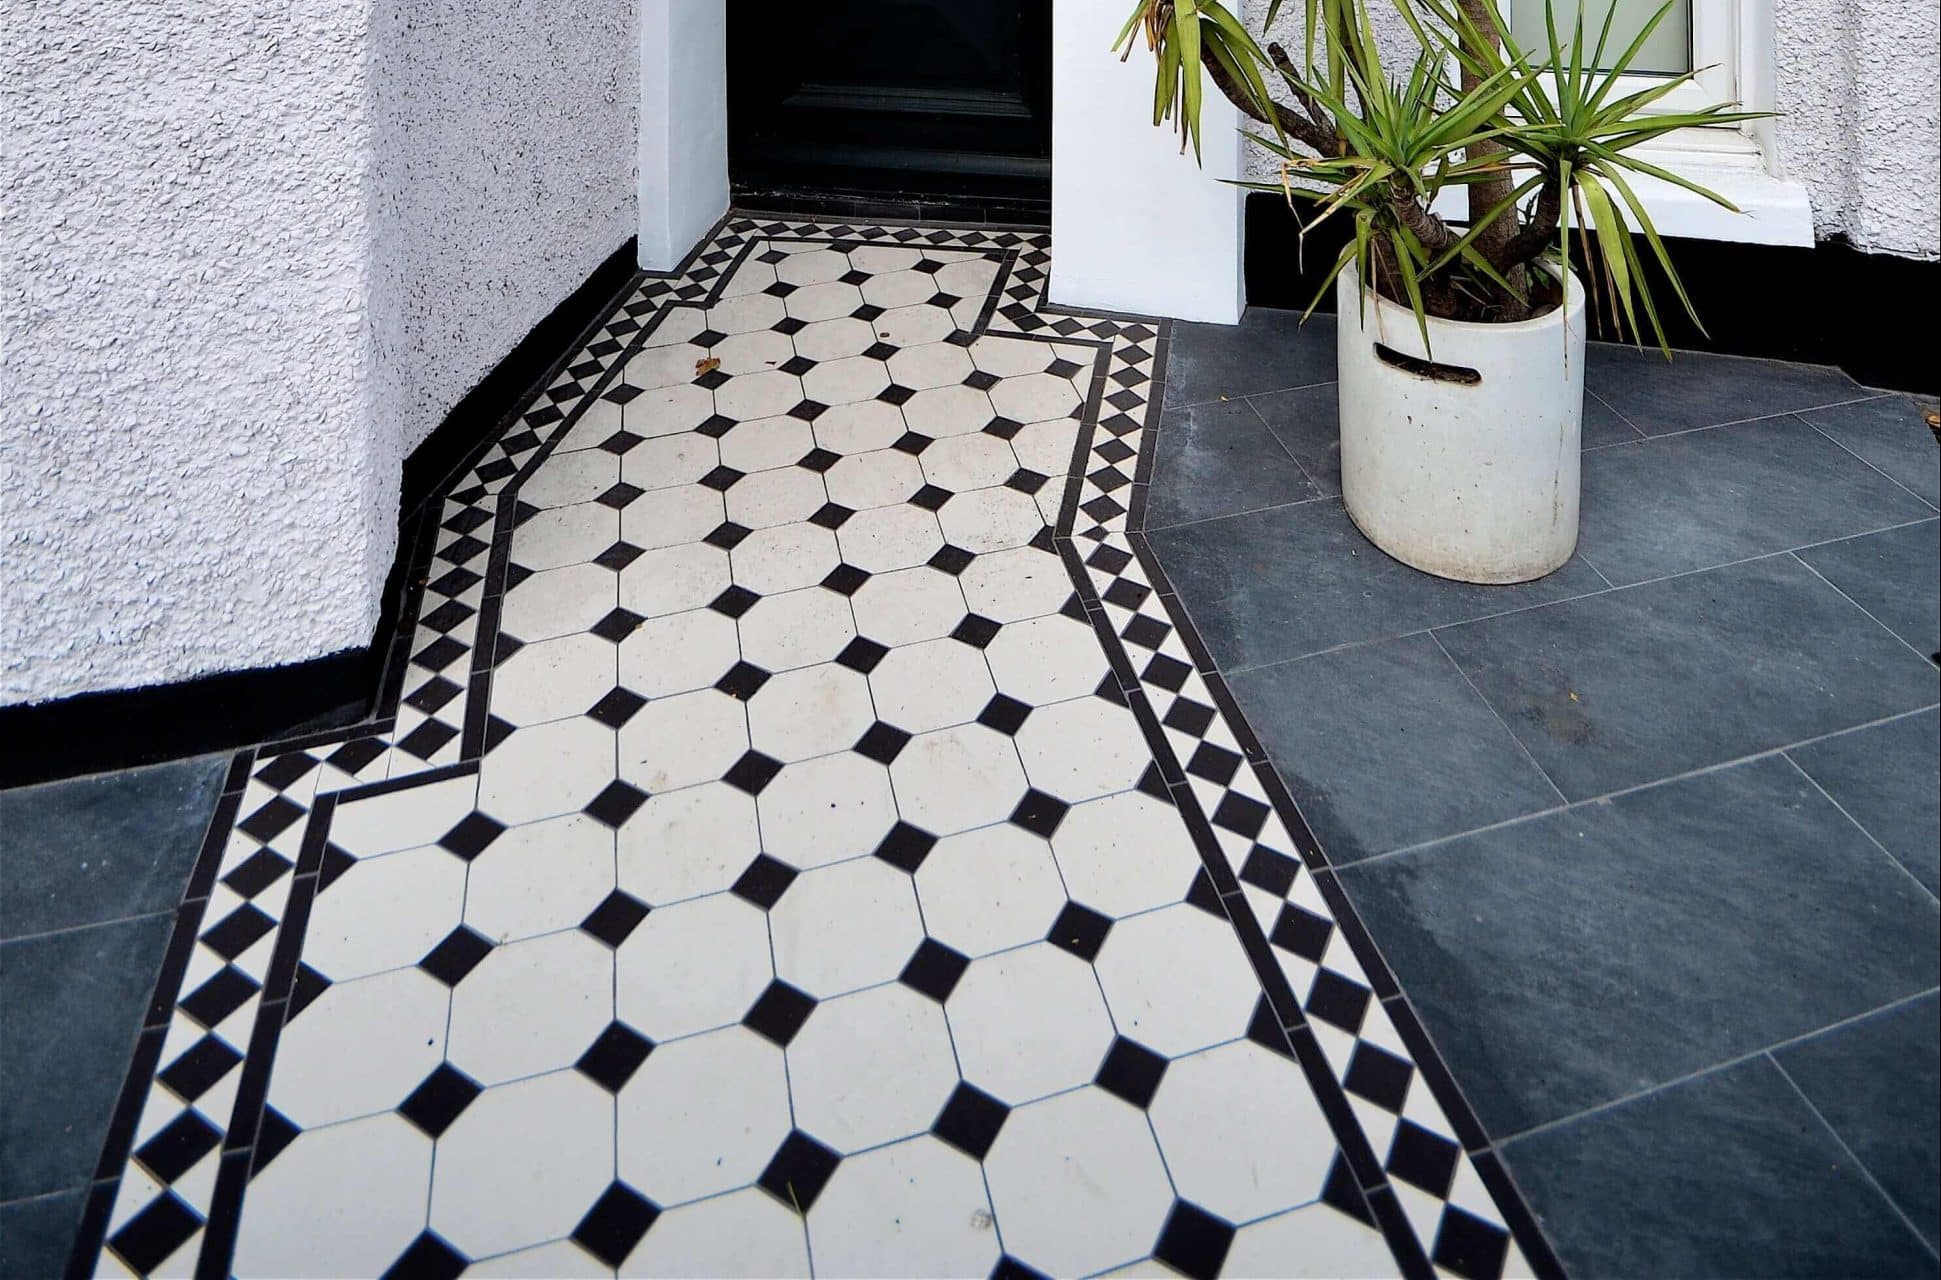  Victorian Pathway Tiling Raynes Park SW20